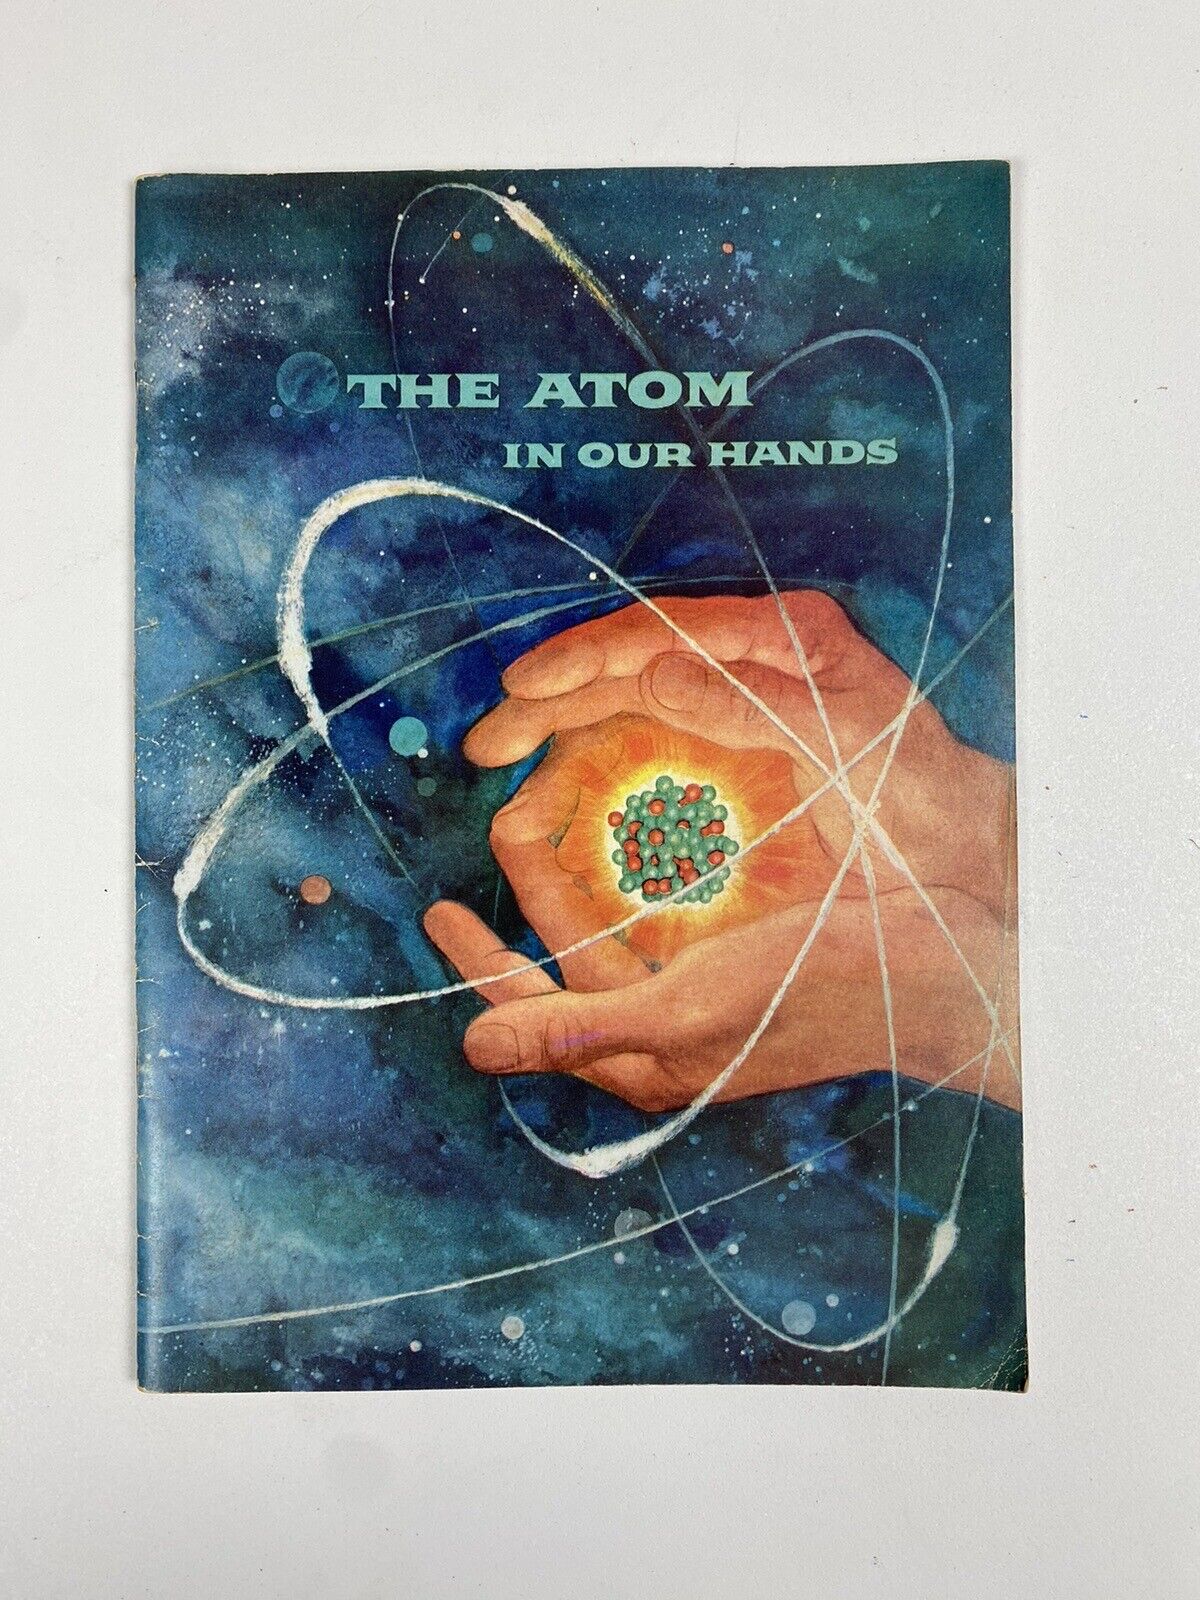 1957 Print Ad “The Atom In Our Hands” Union Carbide Magazine Book Nuclear Energy